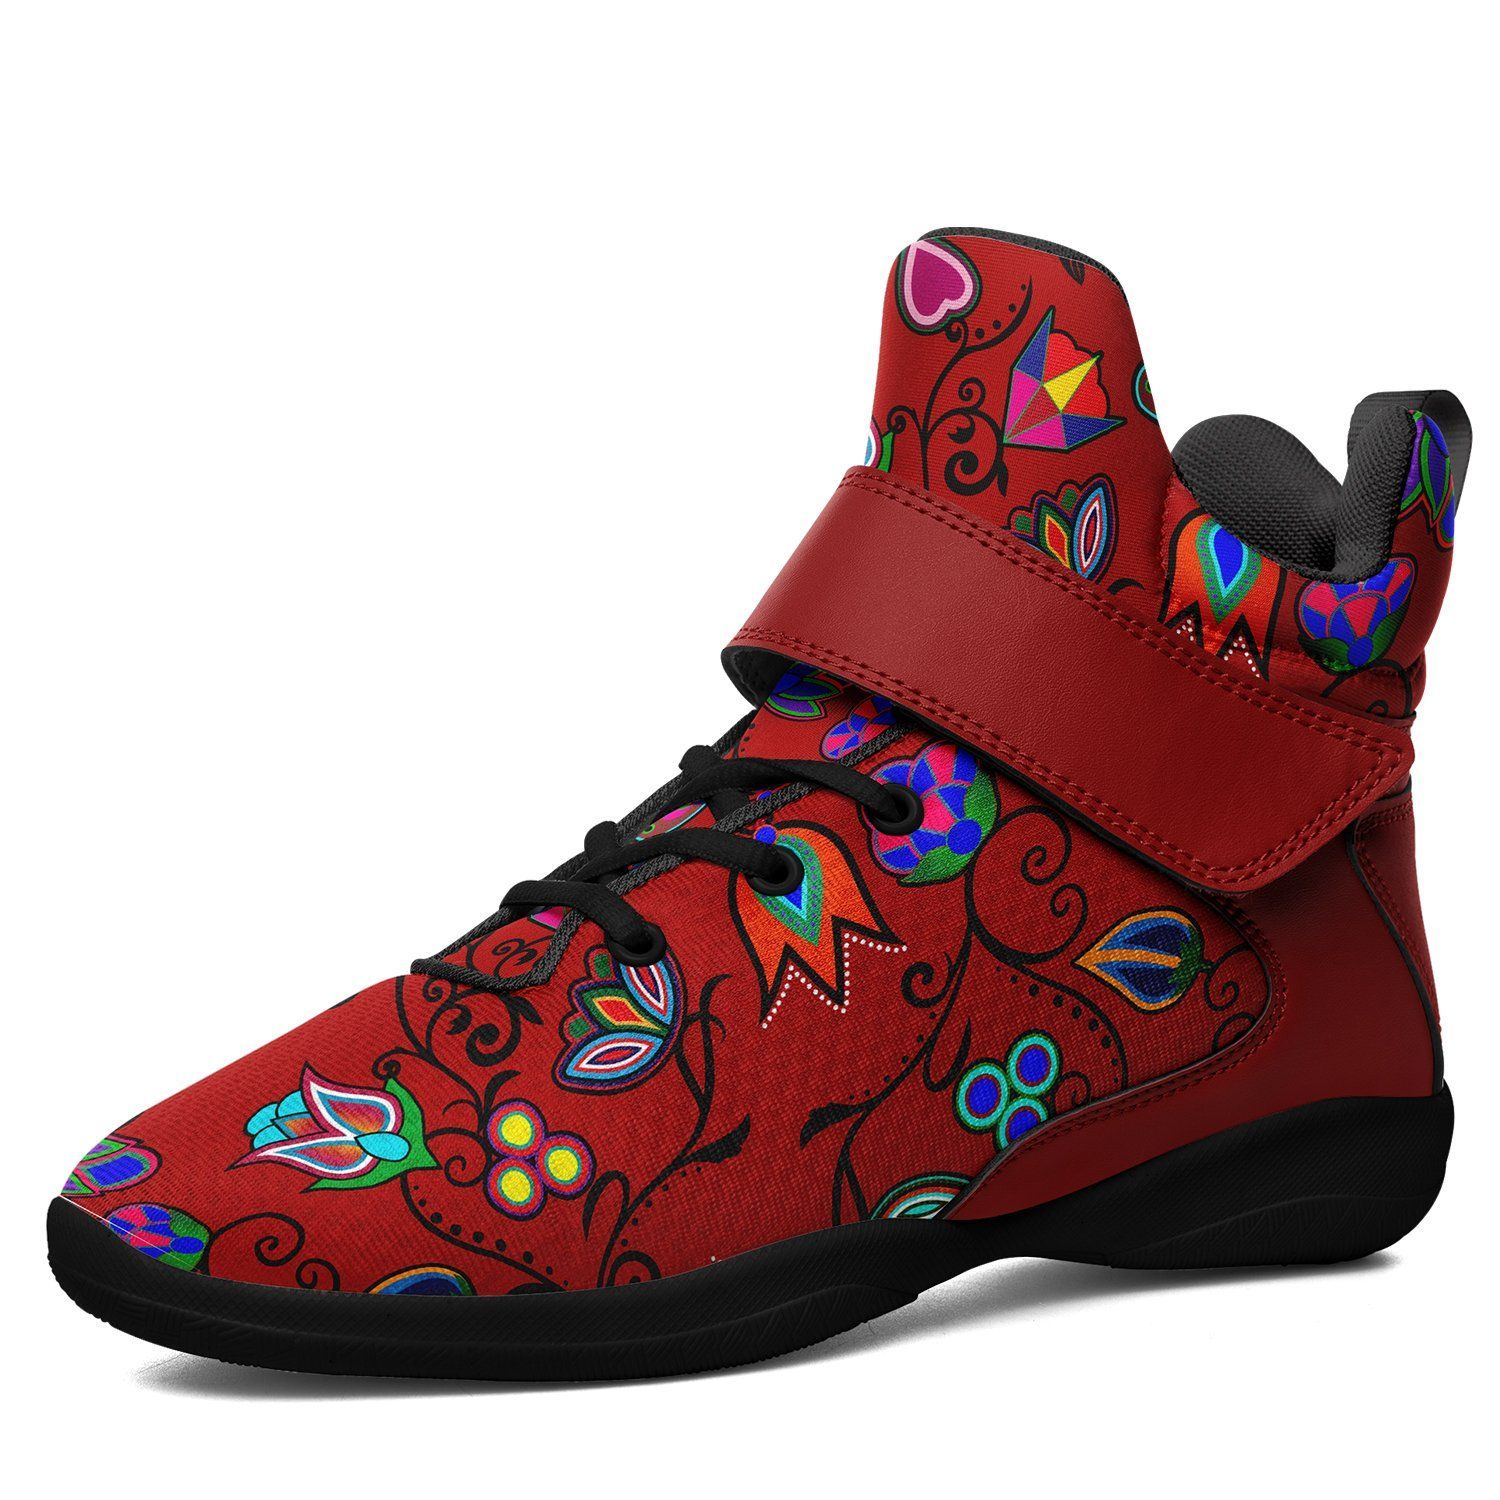 Indigenous Paisley Dahlia Ipottaa Basketball / Sport High Top Shoes - Black Sole 49 Dzine US Men 7 / EUR 40 Black Sole with Dark Red Strap 